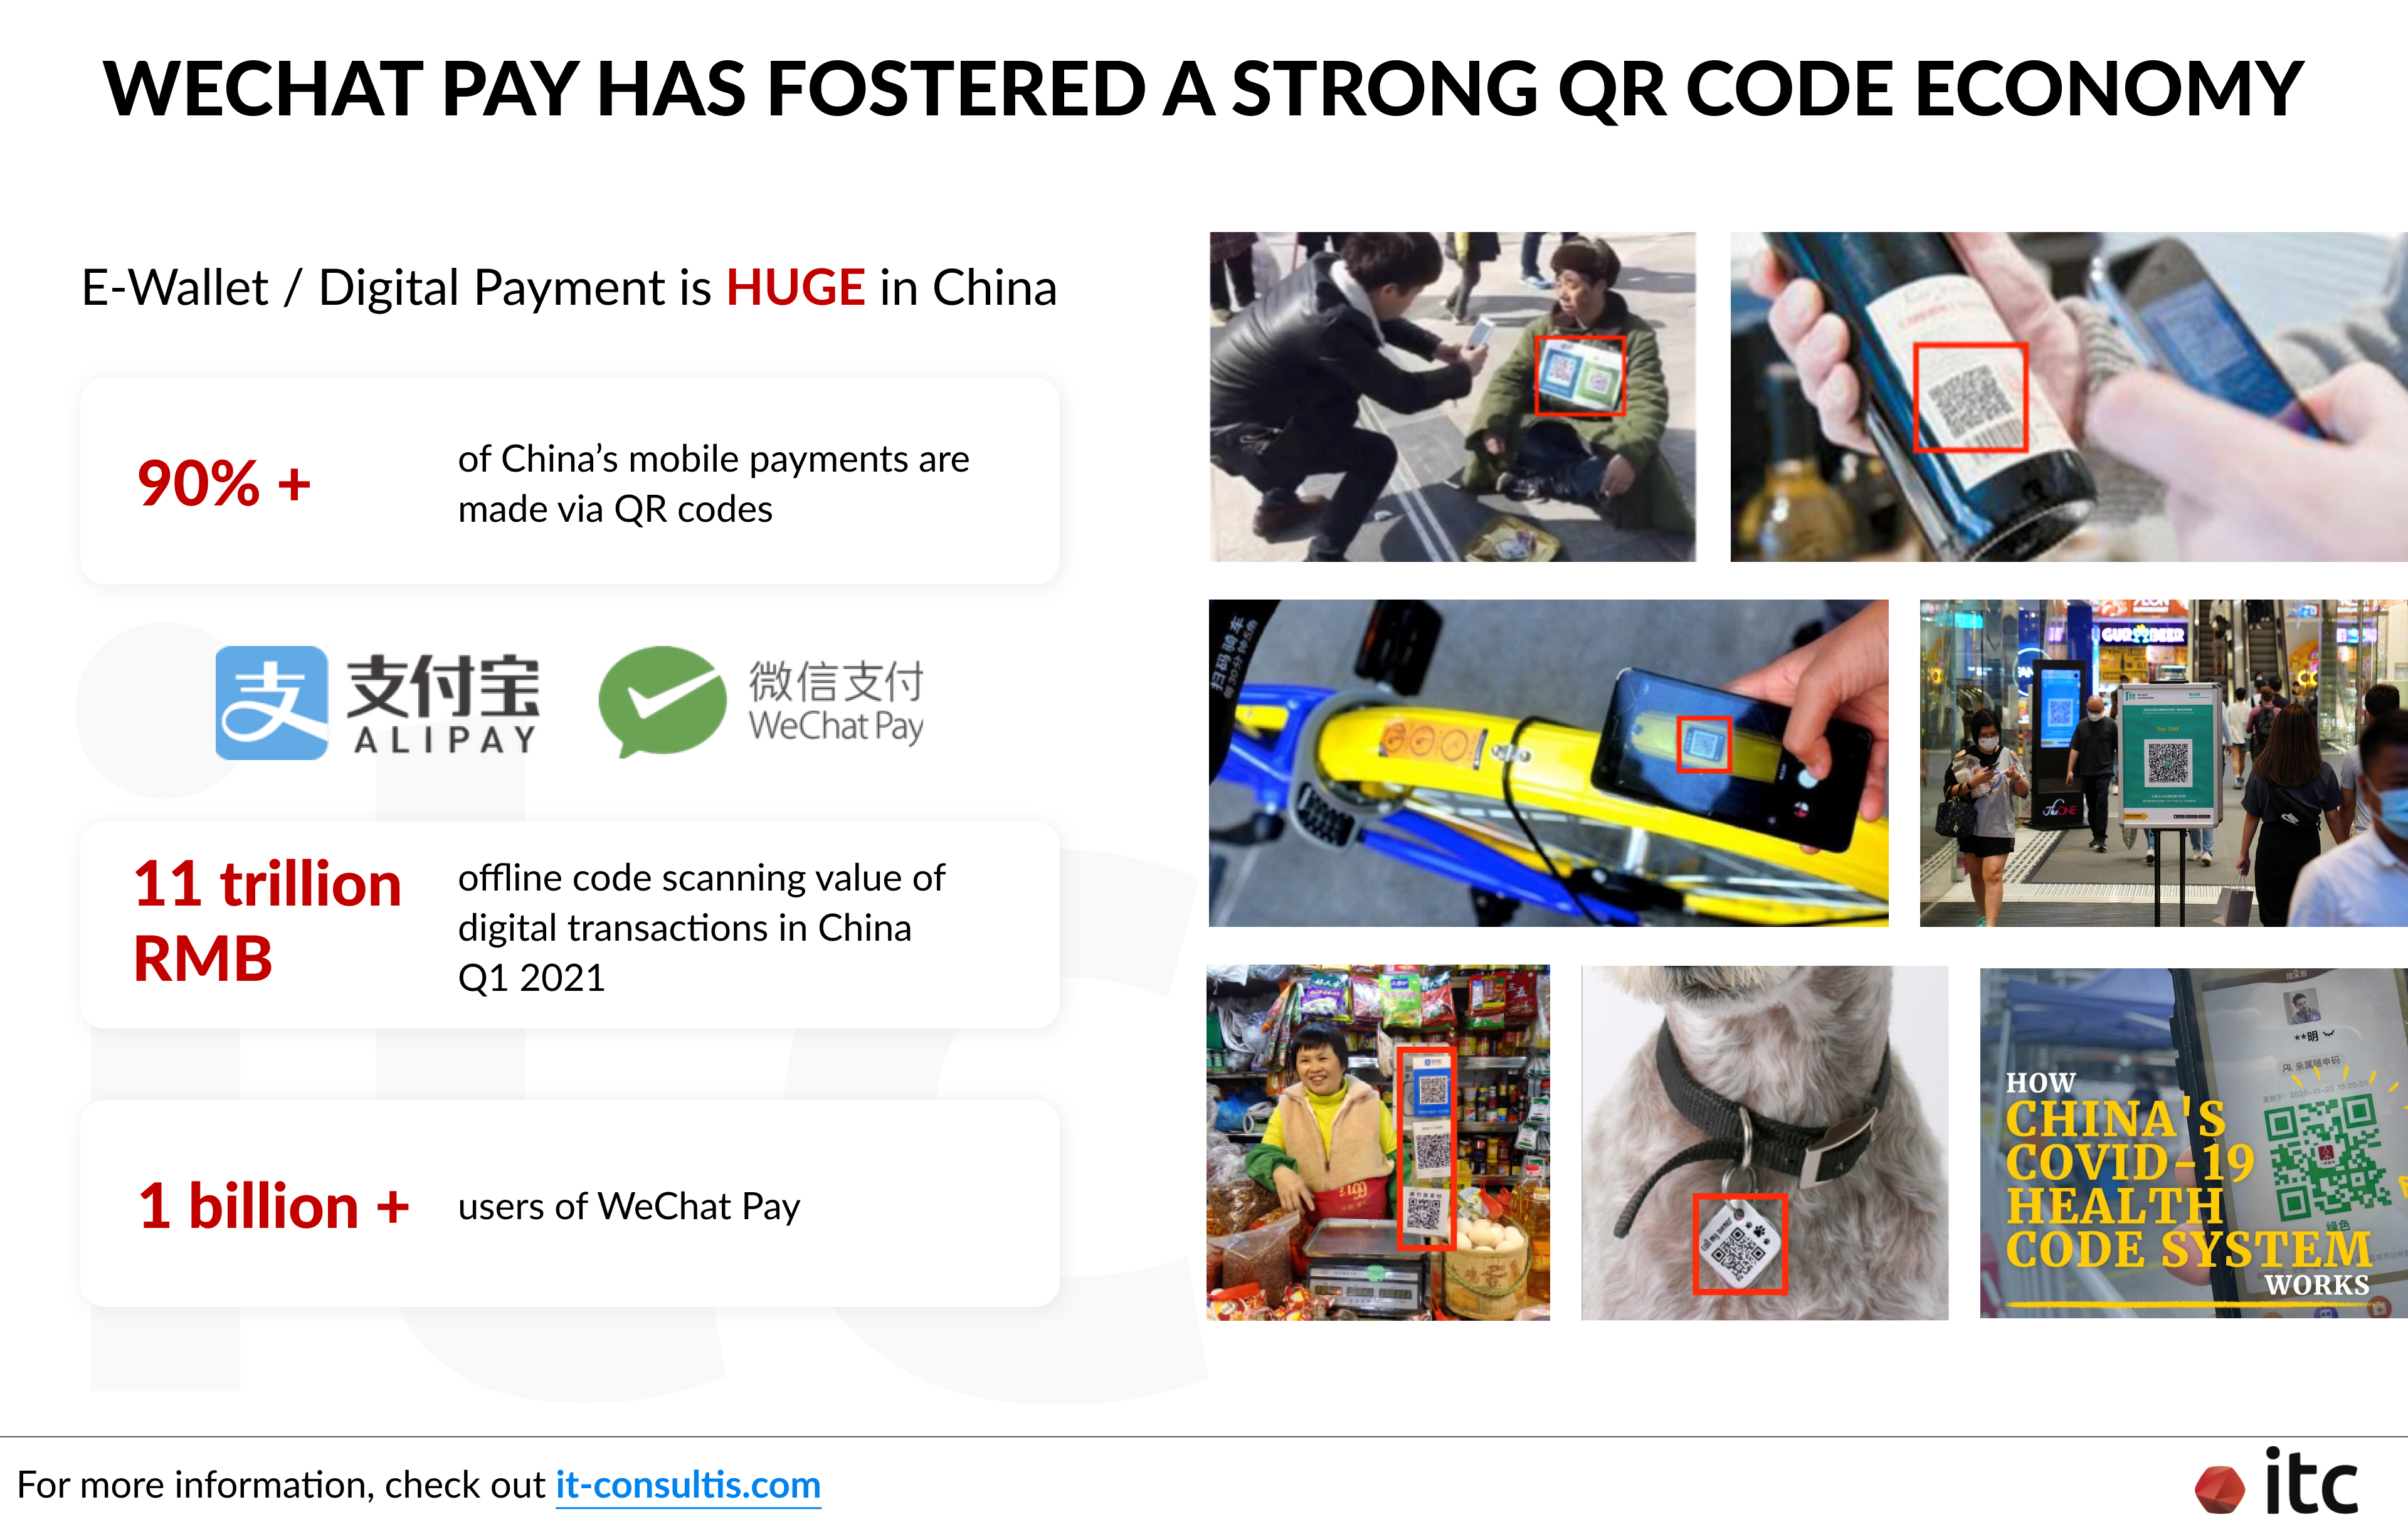 WeChat Pay has fostered a strong QR code economy with 90%+ of China's mobile payments